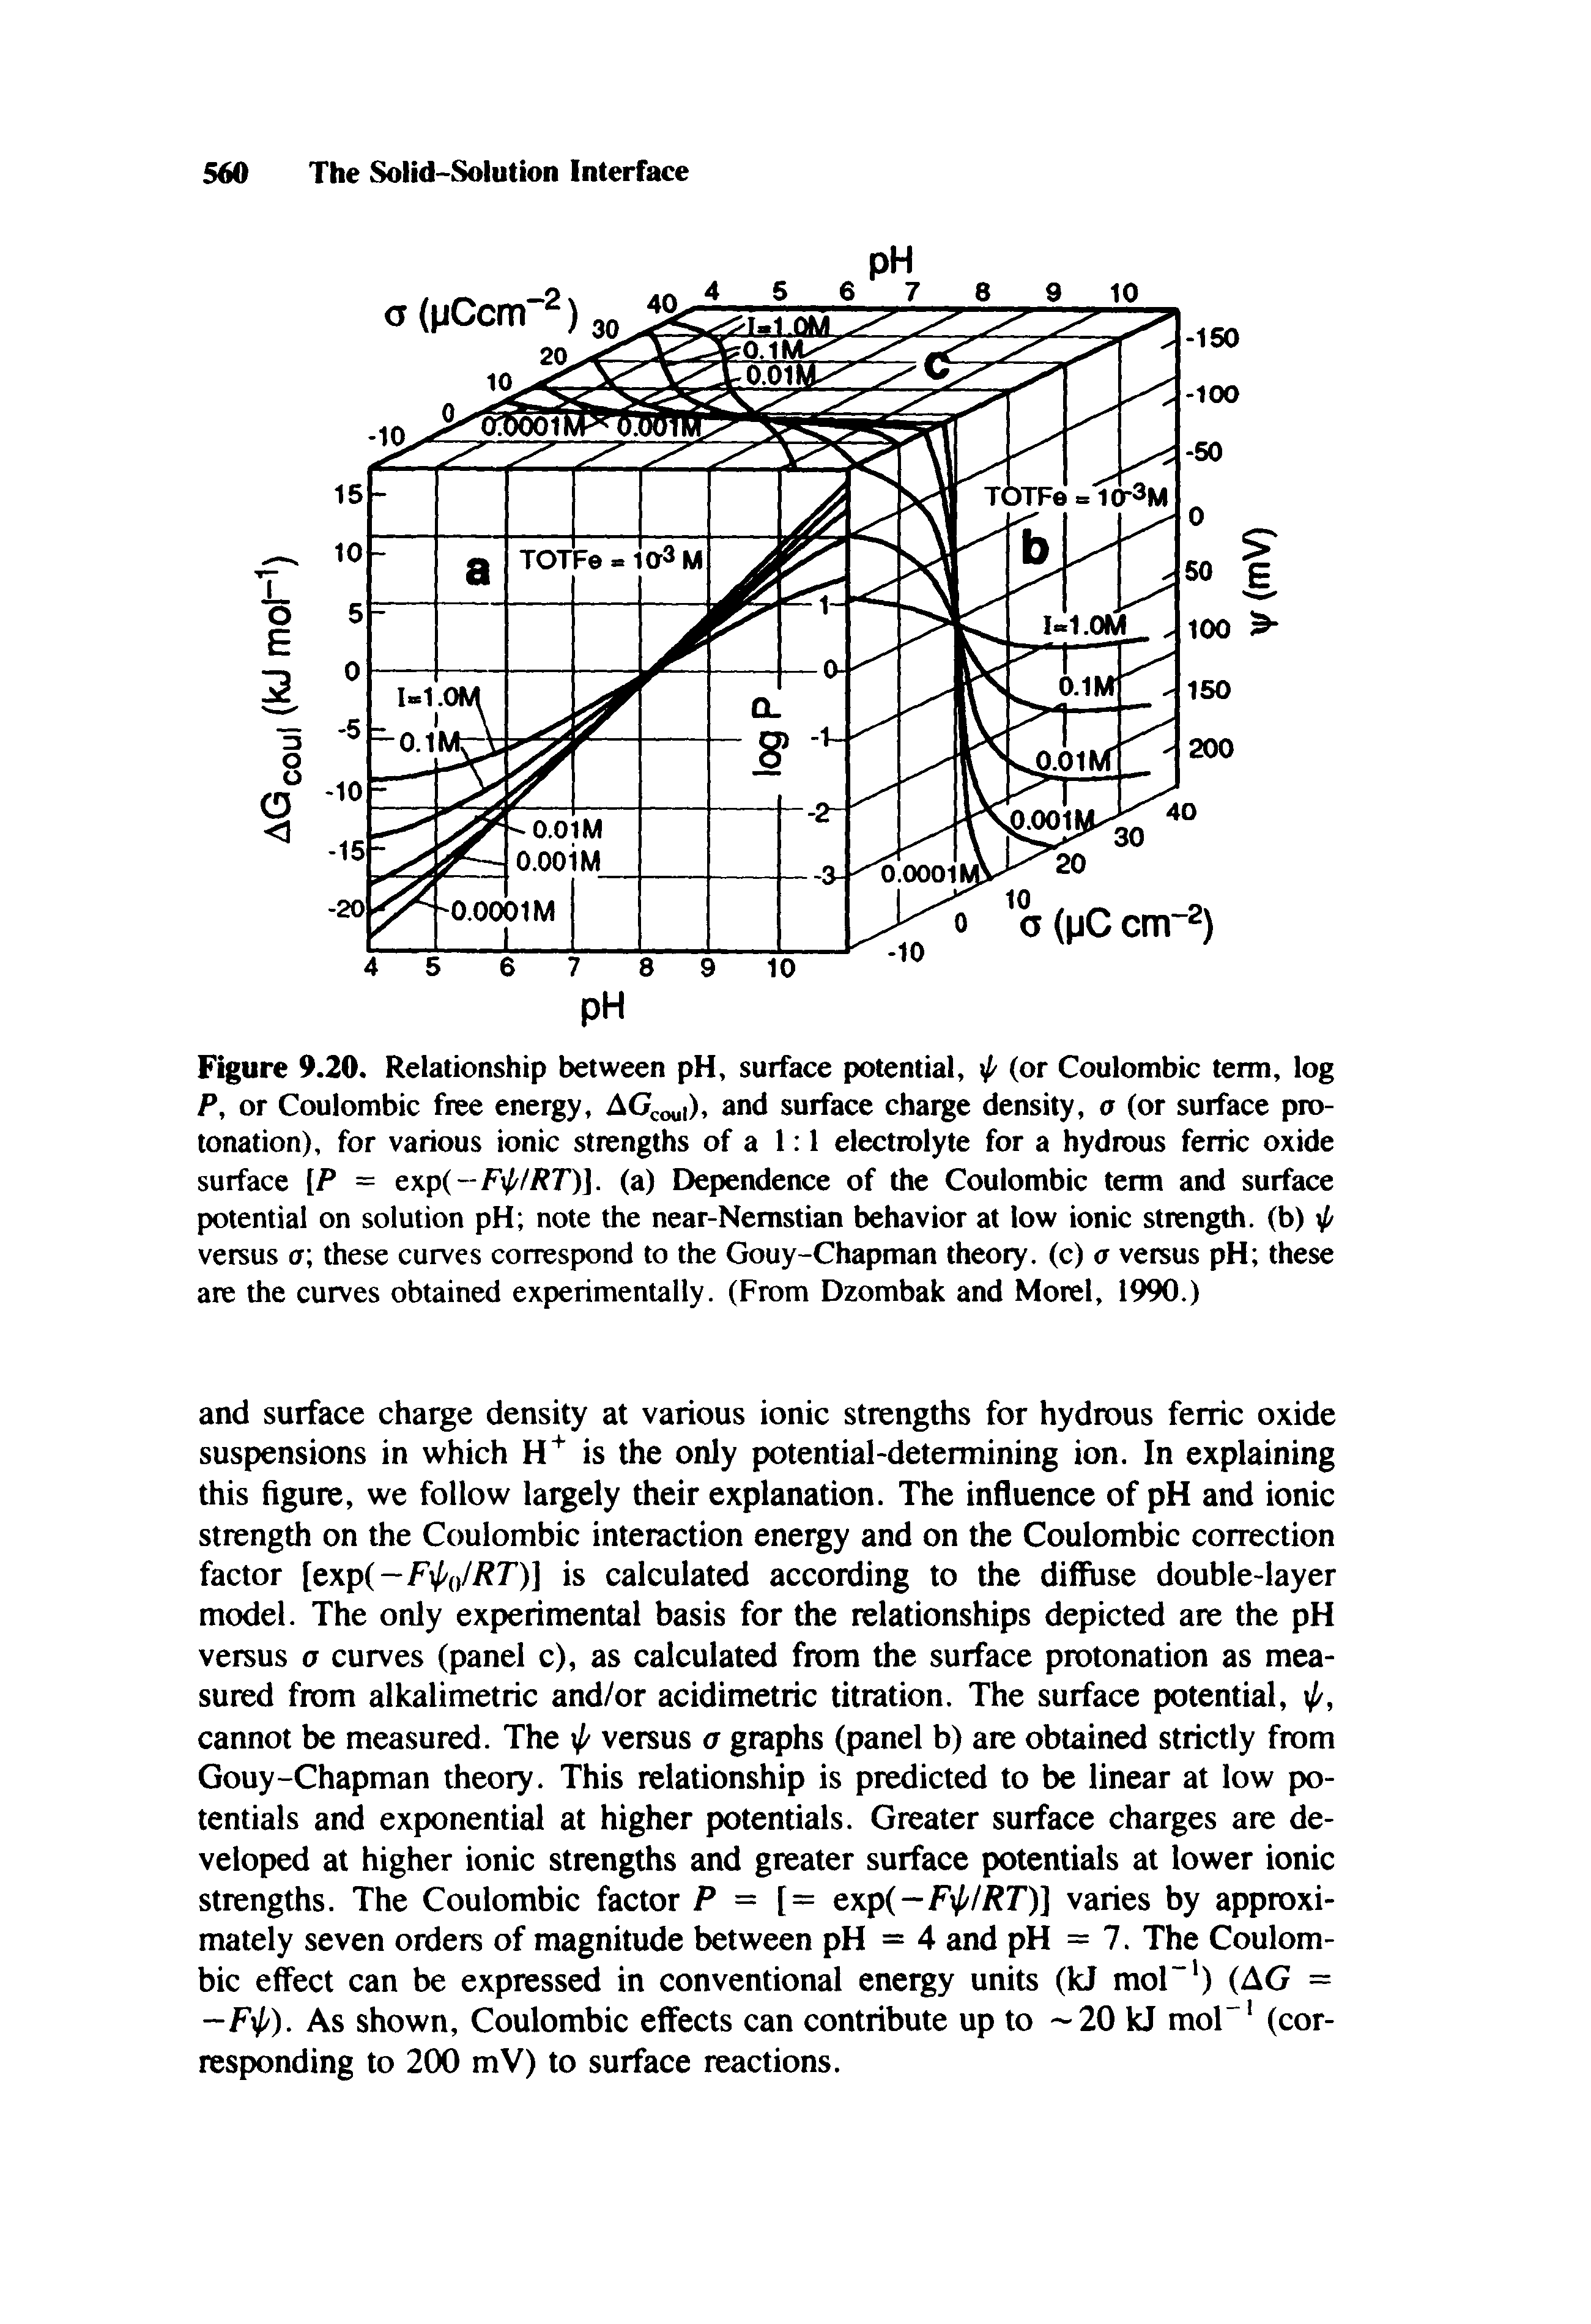 Figure 9.20. Relationship between pH, surface potential, (or Coulombic term, log P, or Coulombic free energy, AGcoui) and surface charge density, o (or surface protonation), for various ionic strengths of a 1 1 electrolyte for a hydrous ferric oxide surface [P = exp(--Fi/ // 7 )]. (a) Dependence of the Coulombic term and surface potential on solution pH note the near-Nemstian behavior at low ionic strength, (b) xp versus or these curves correspond to the Gouy-Chapman theory, (c) o versus pH these are the curves obtained experimentally. (From Dzombak and Morel, 1990.)...